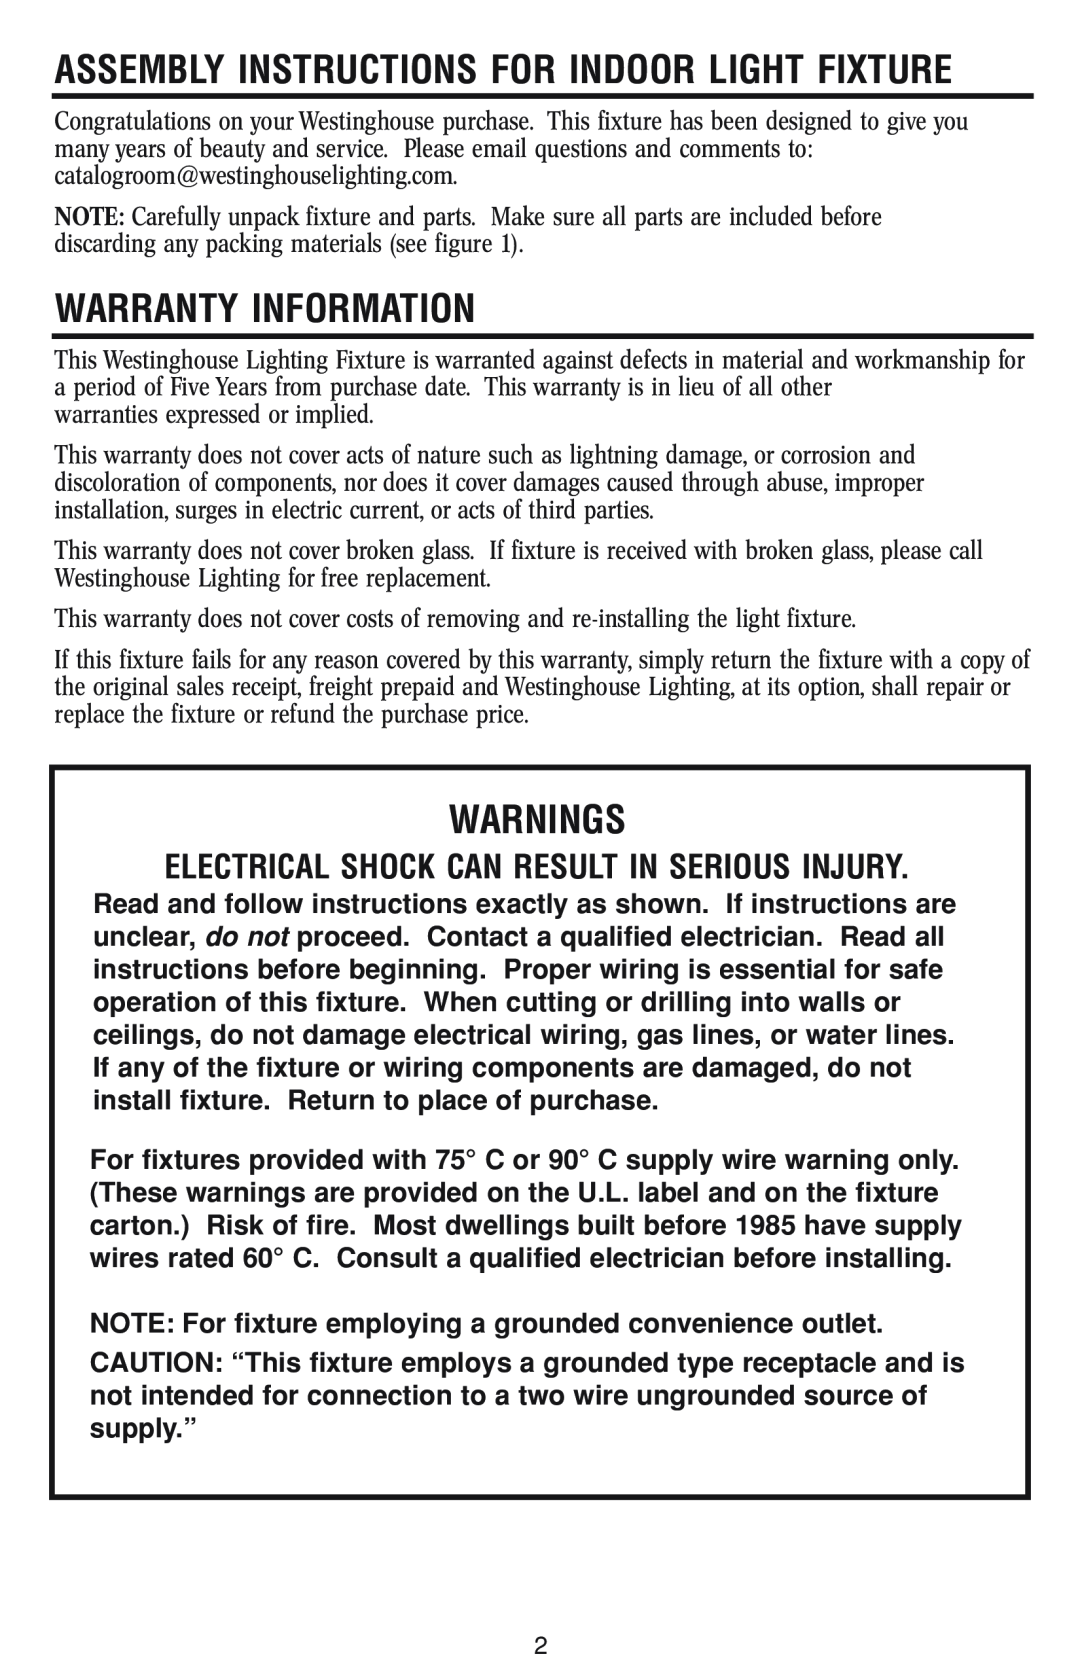 Westinghouse W-029 owner manual Warranty Information, Warnings, Assembly Instructions For Indoor Light Fixture 